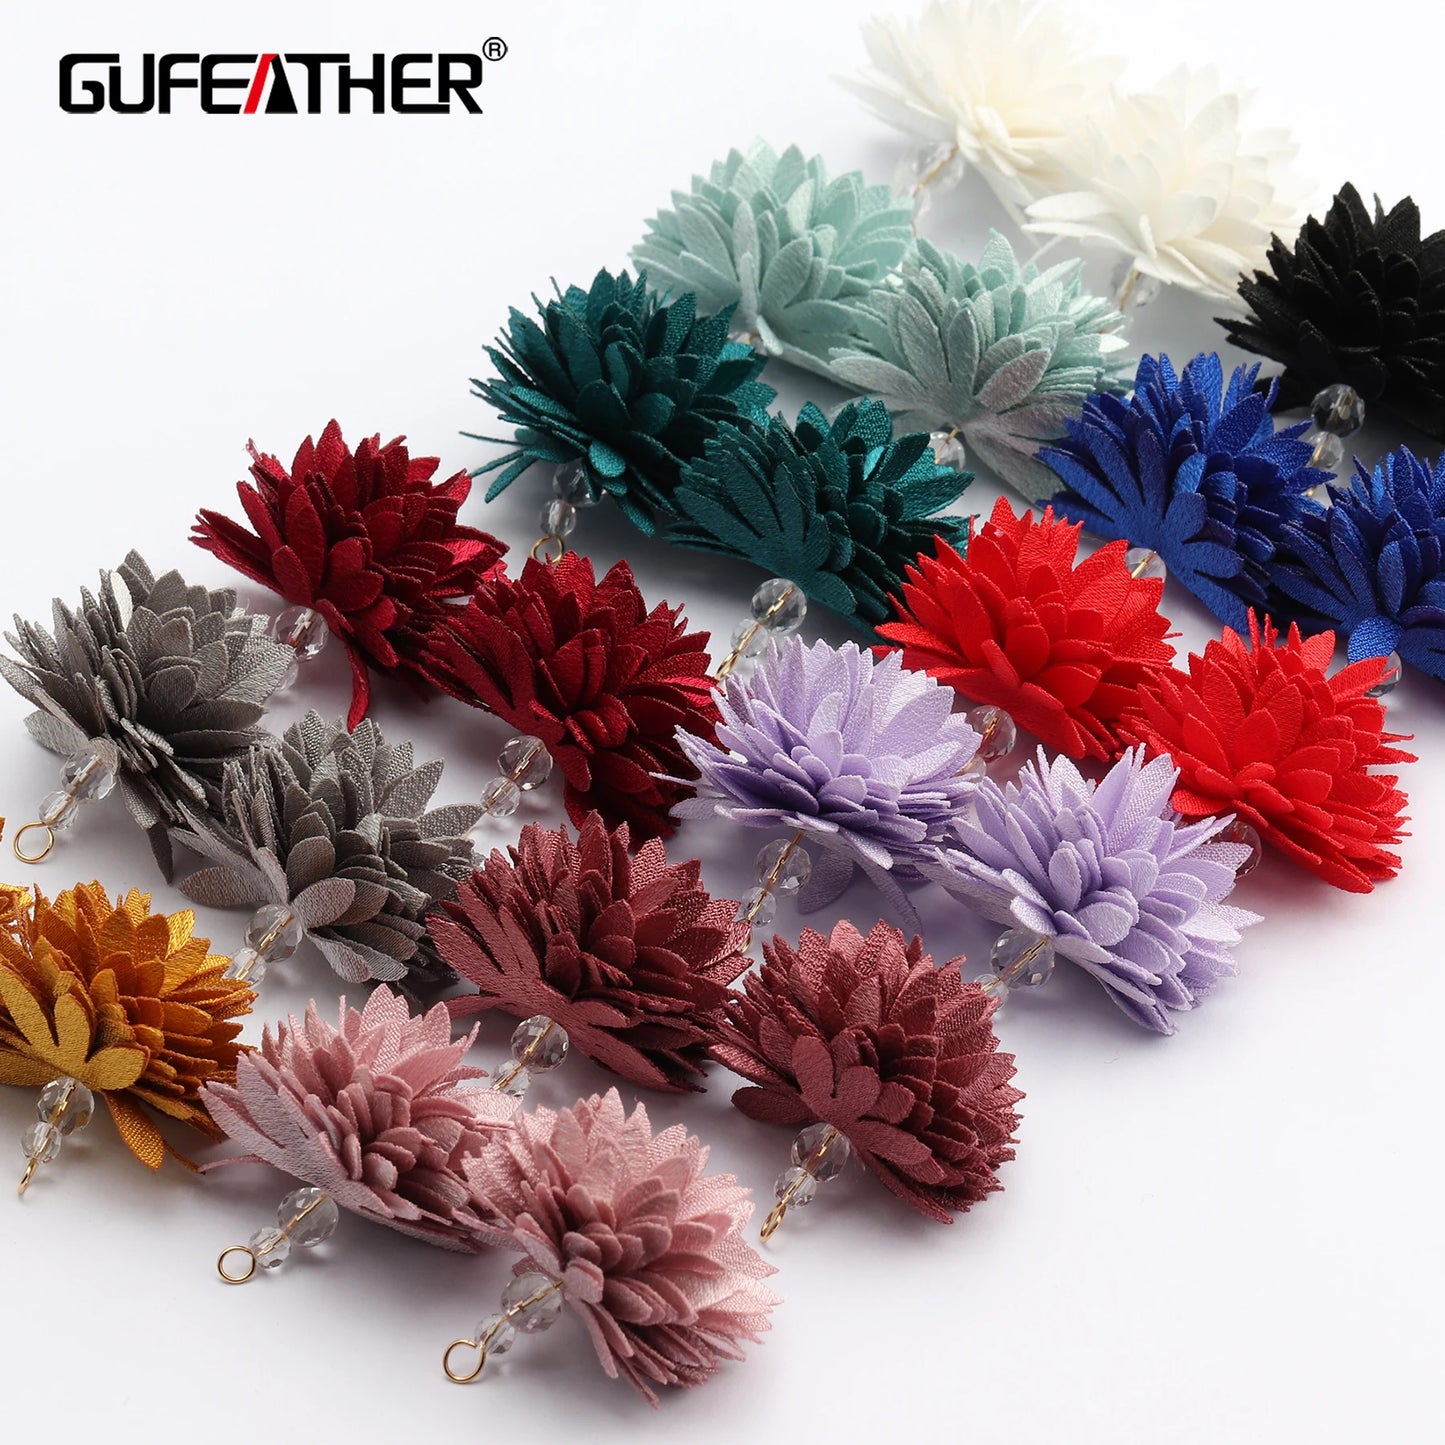 GUFEATHER M646,jewelry accessories,diy flower pendant,ball shape,hand made,flower ball,diy earring,jewelry making,10pcs/lot